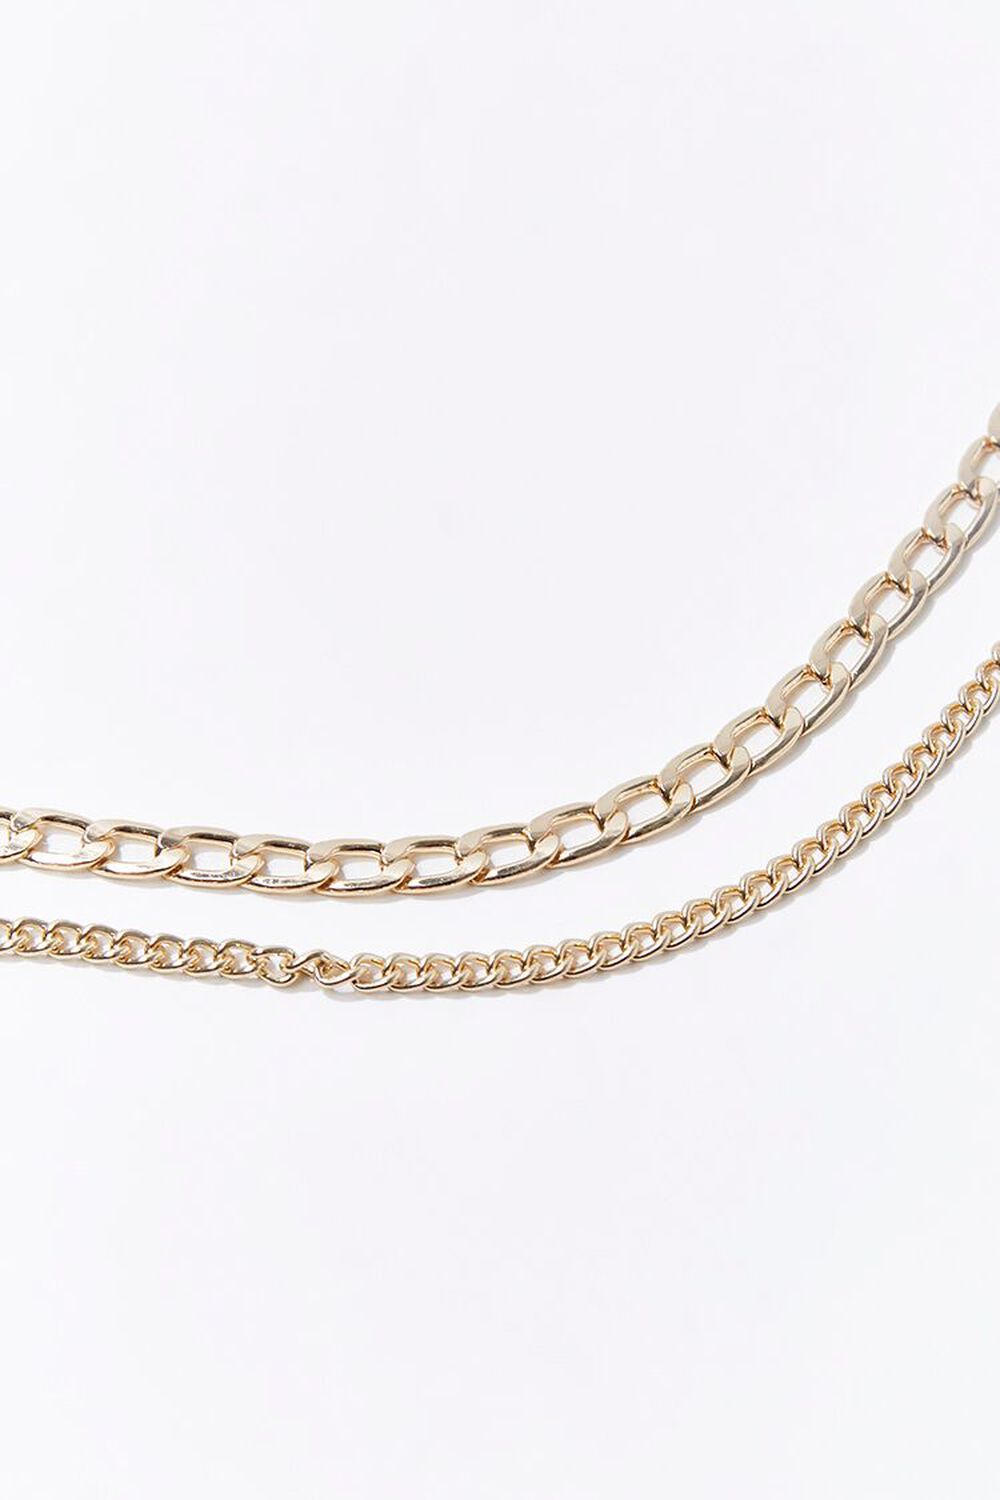 GOLD Sustainable Layered Chain Necklace, image 1